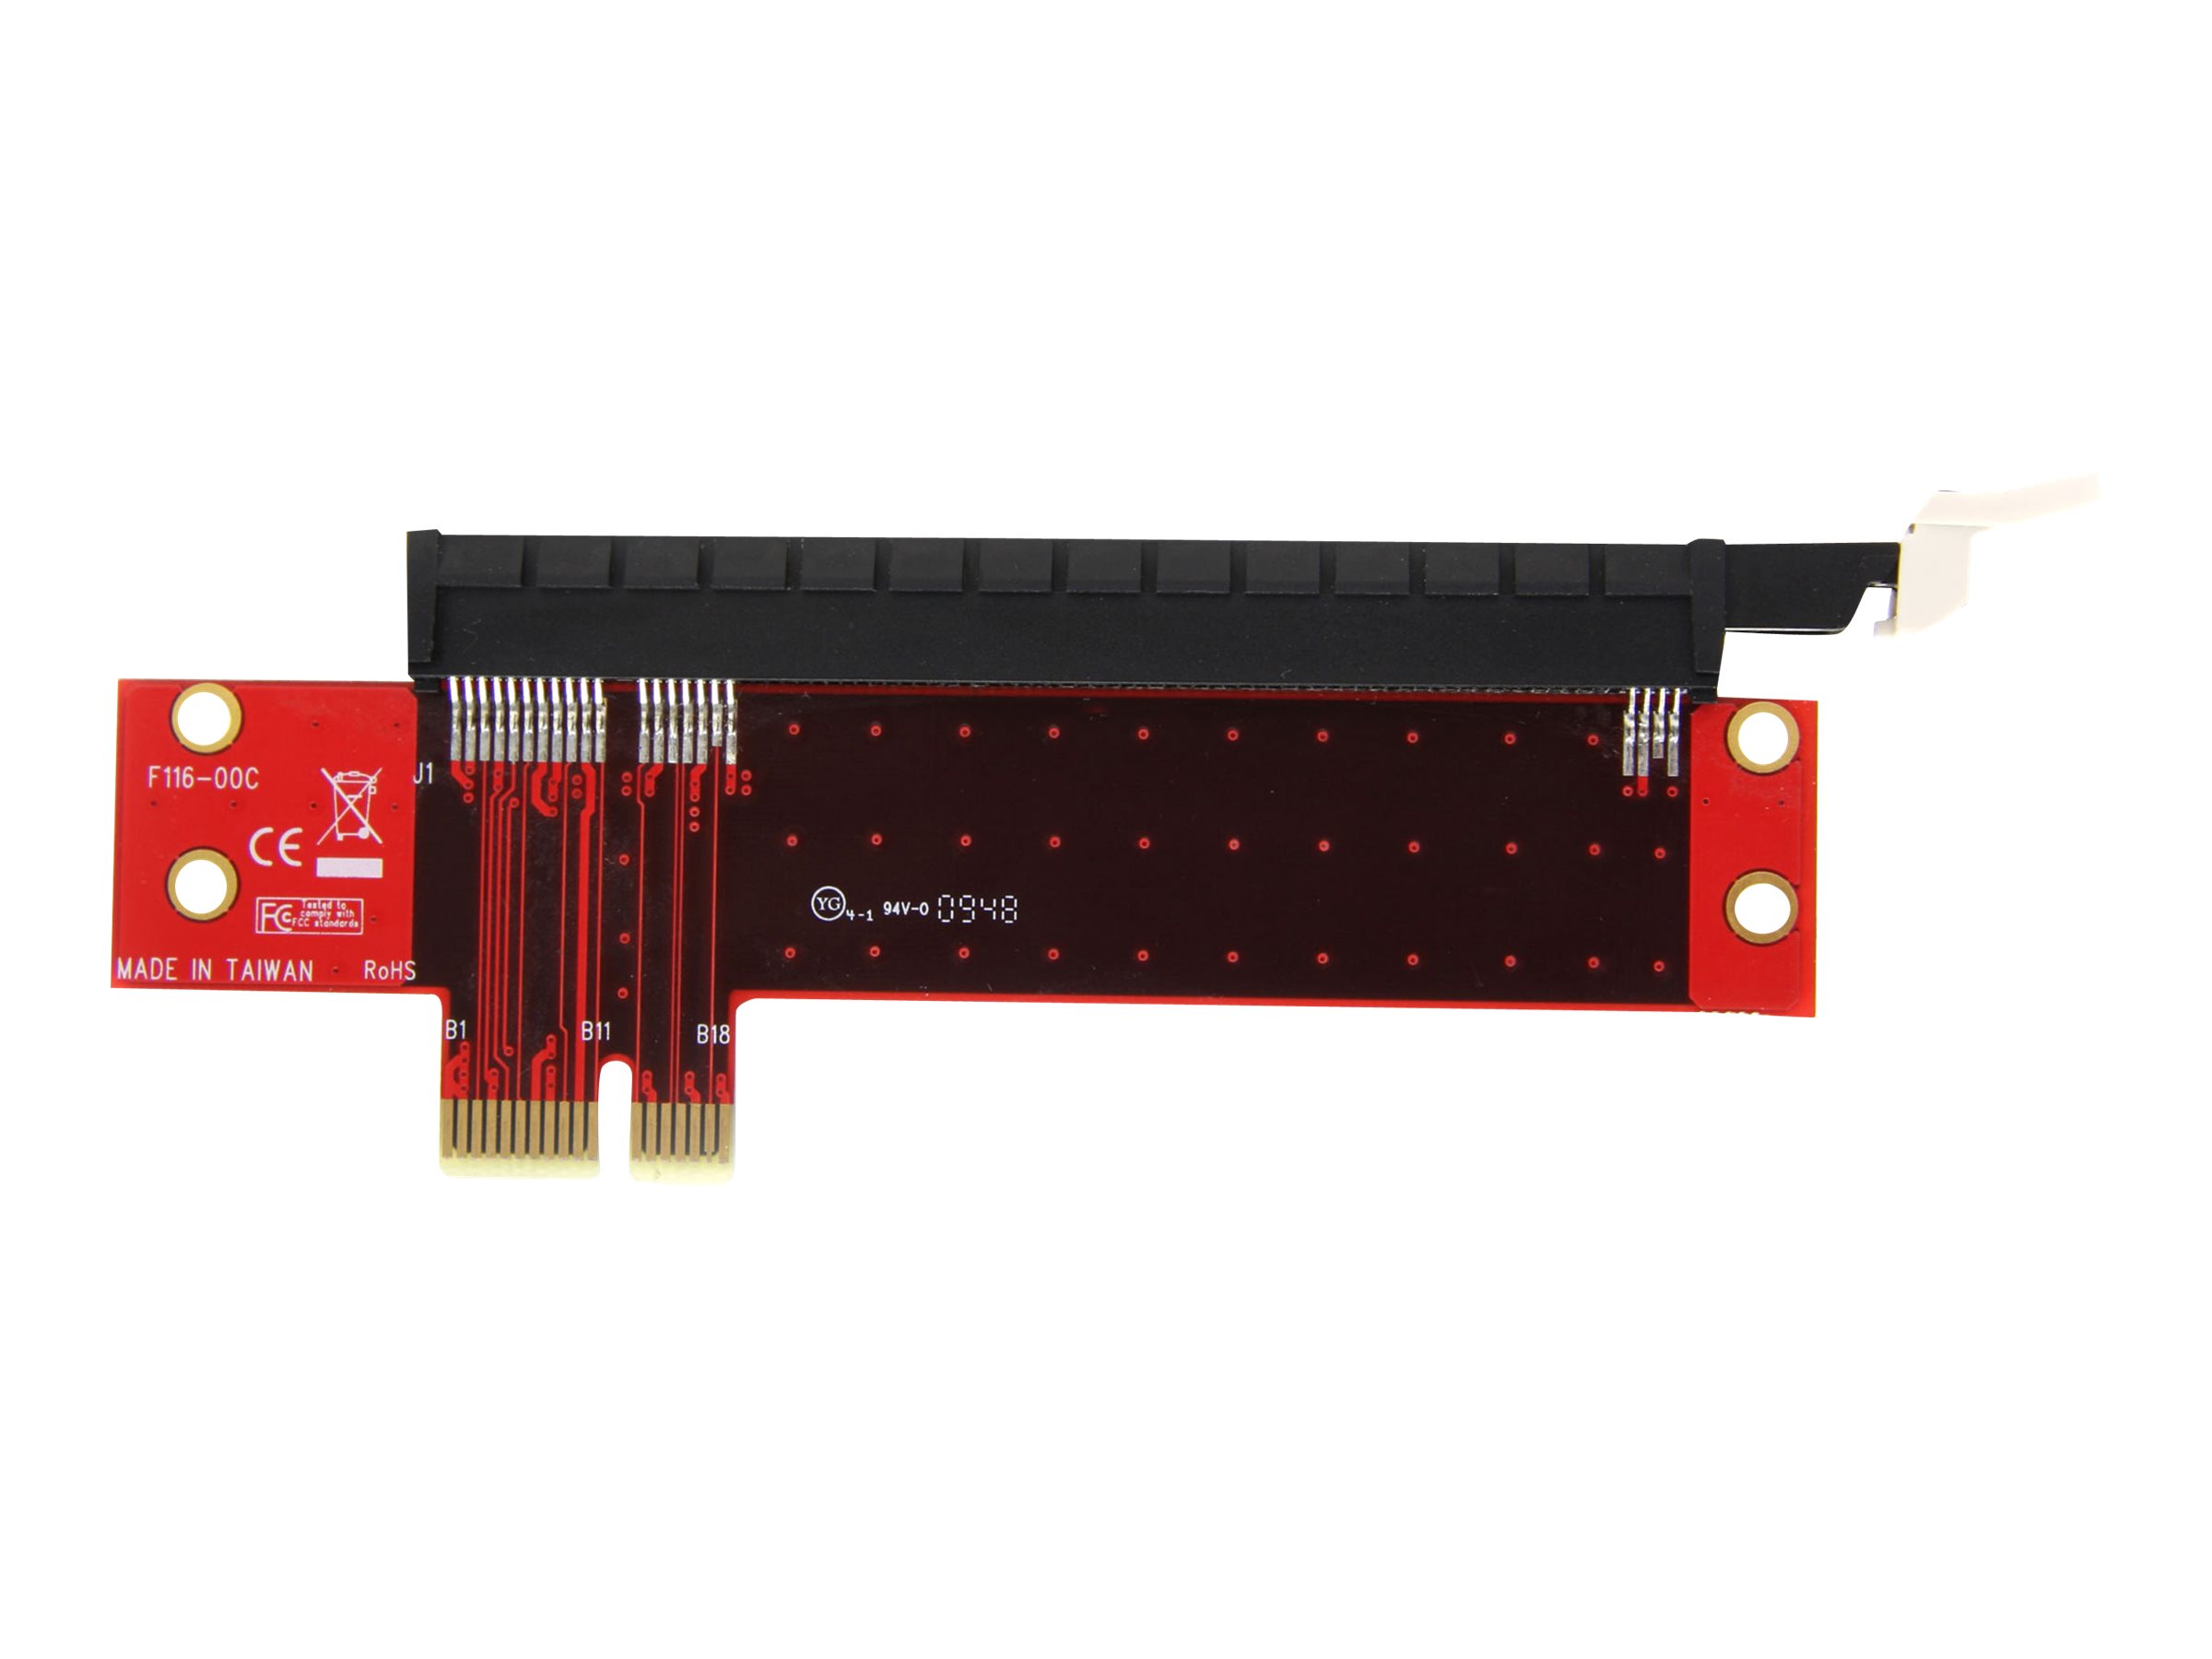 Plons Arabische Sarabo Meedogenloos StarTech.com PCI Express X1 to X16 Low Profile Slot Extension Adapter |  www.shi.com